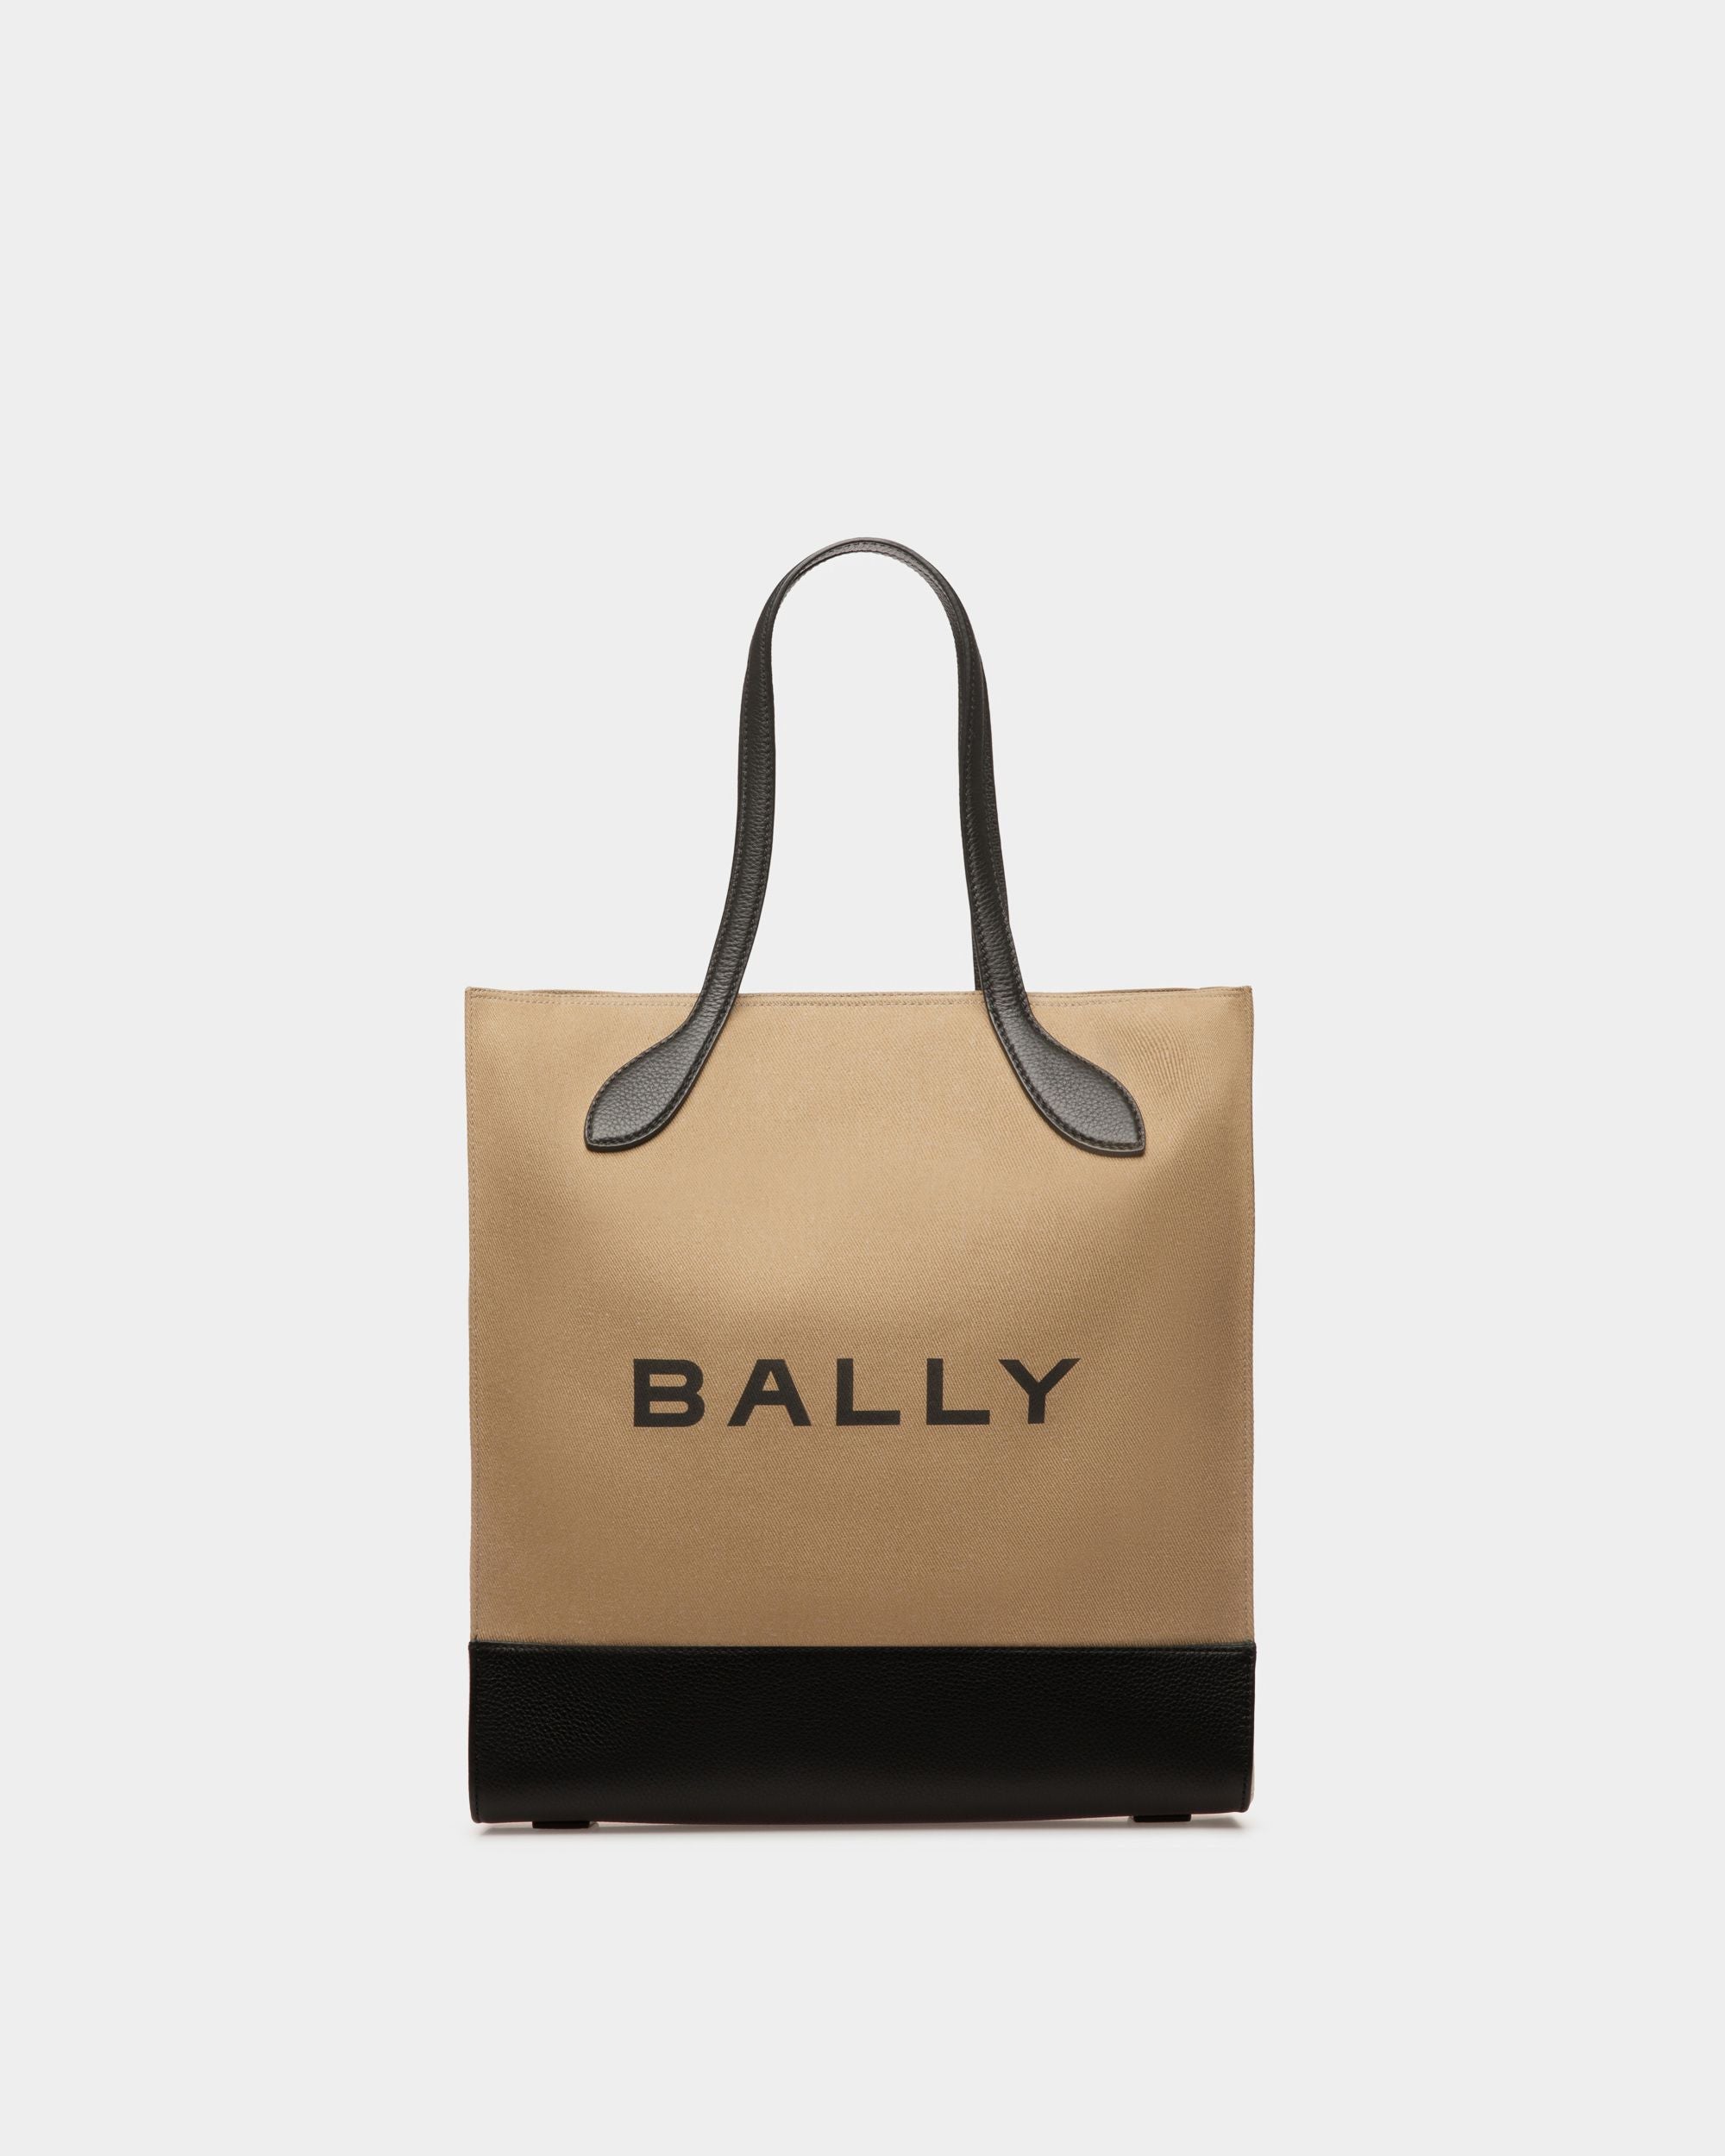 Bar Keep On | Women's Tote Bag | Sand And Black Fabric | Bally | Still Life Front